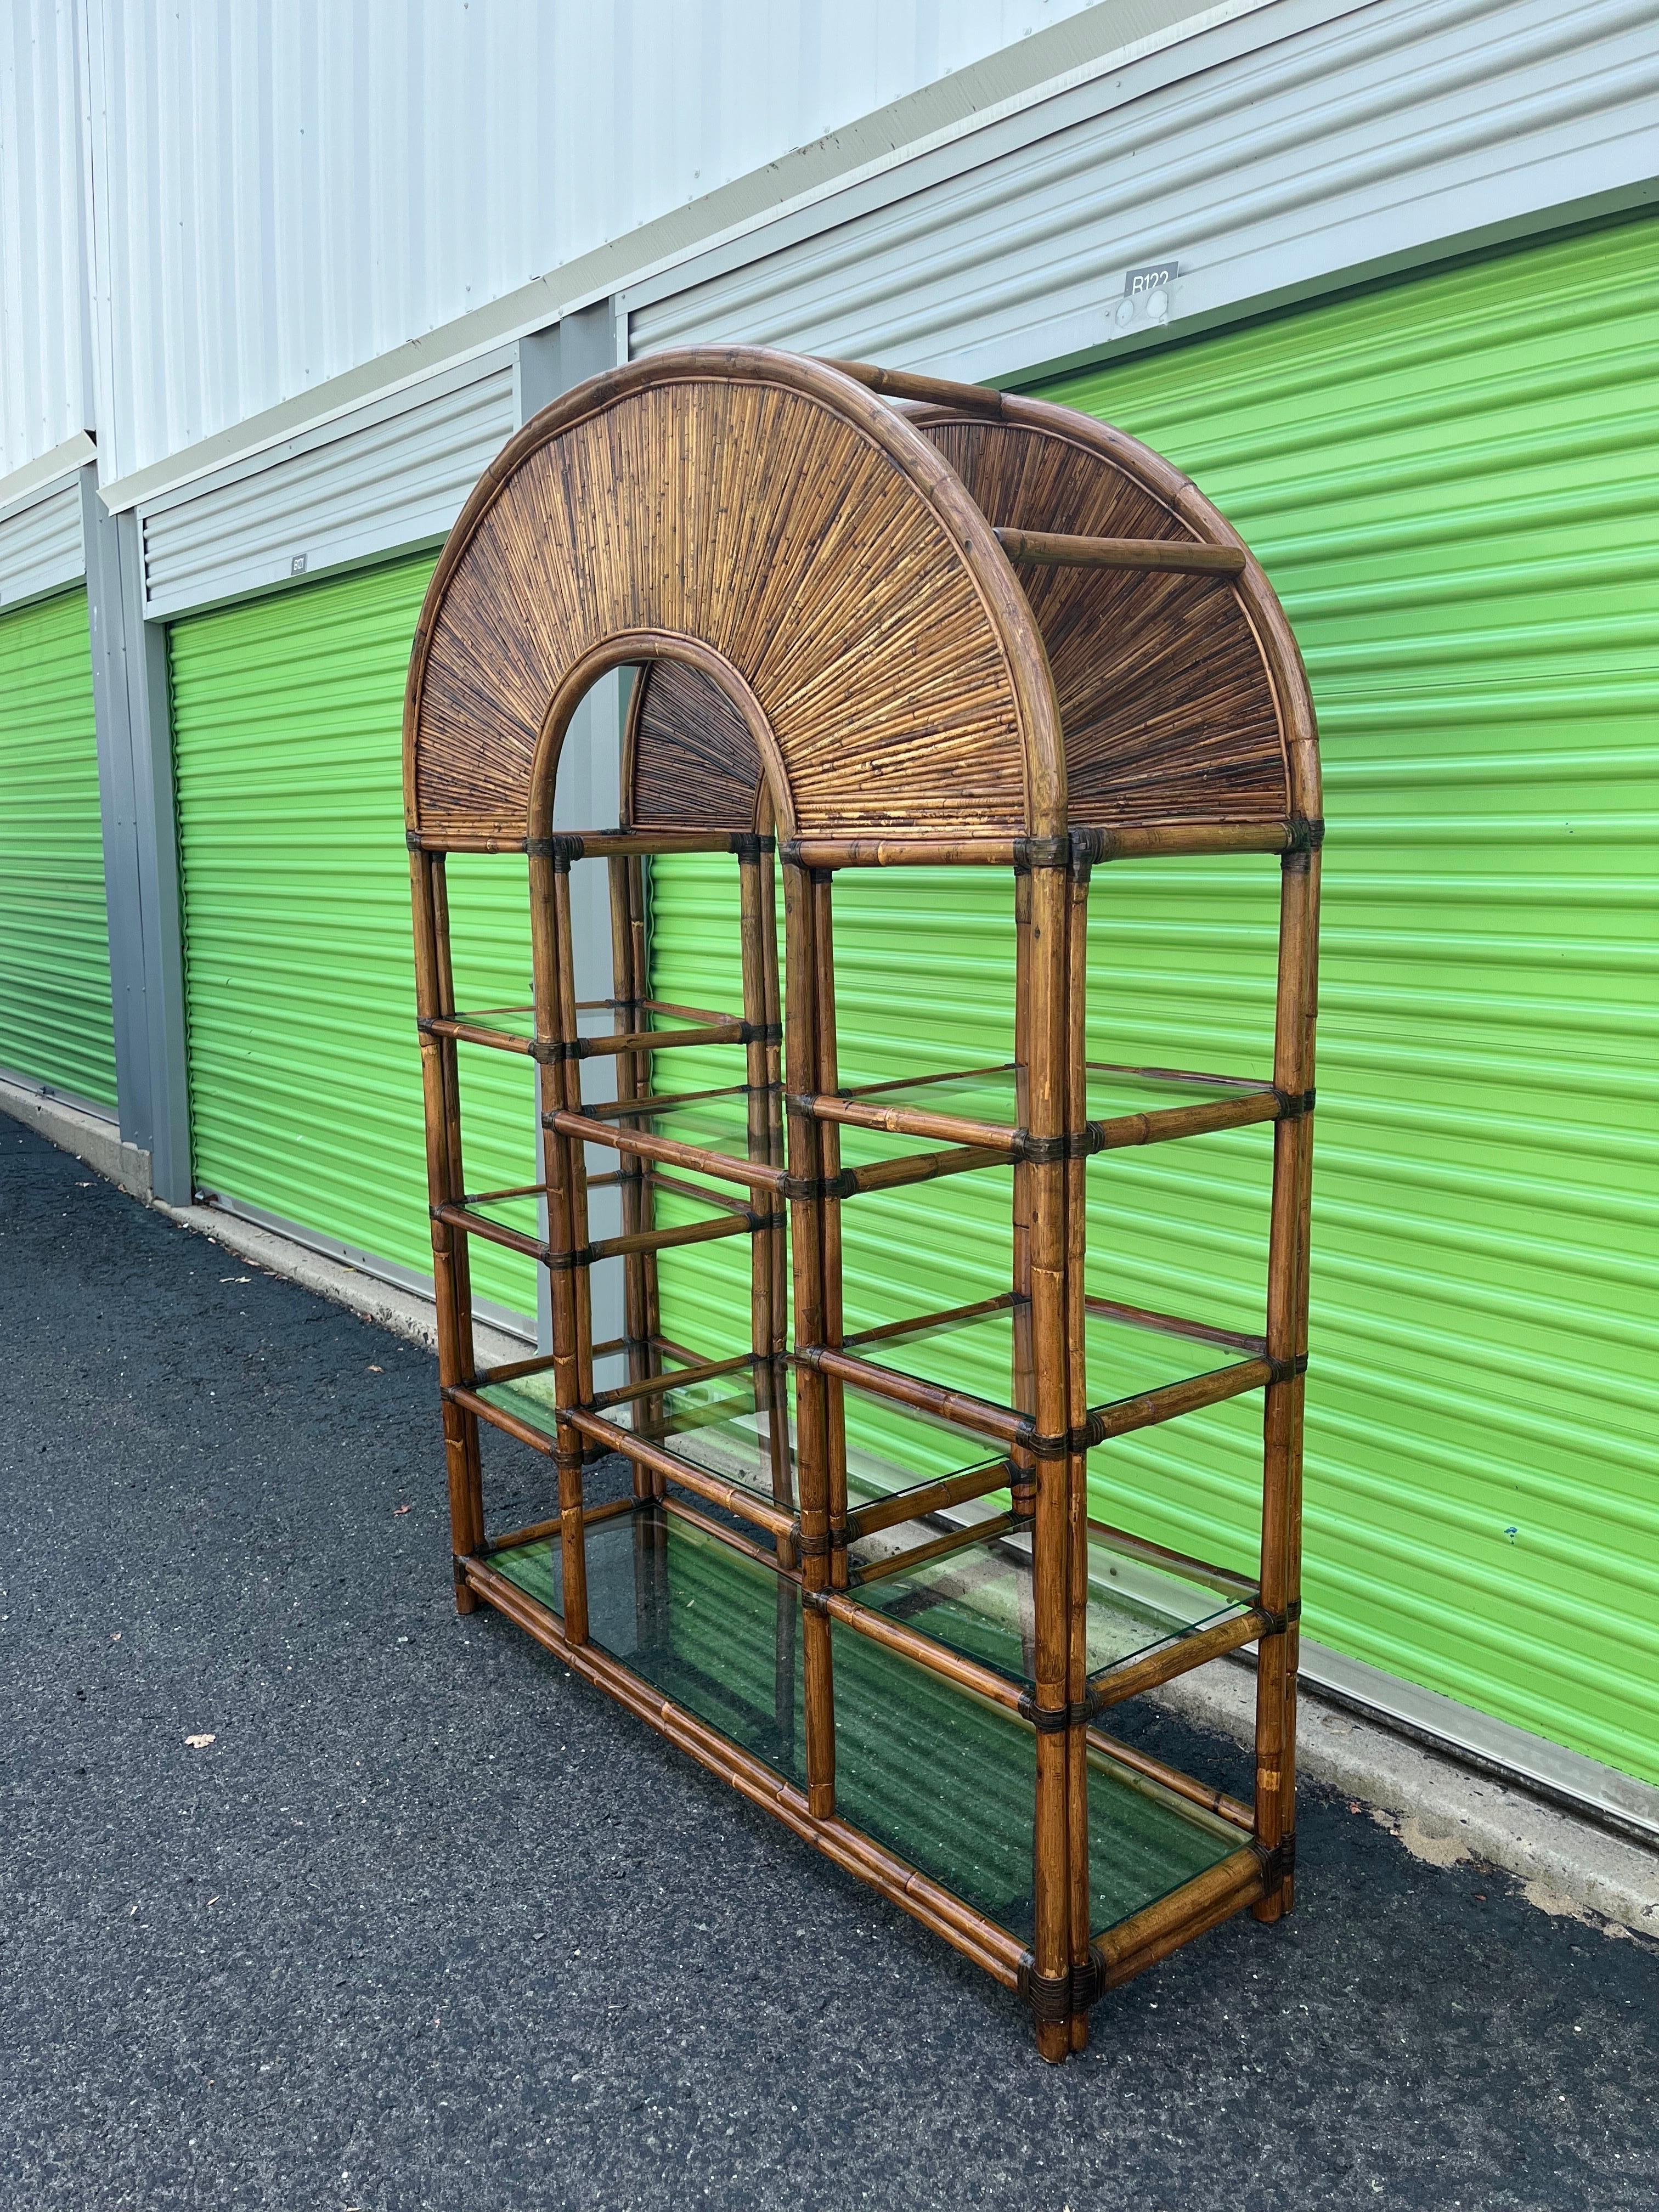 Large rattan etagere features Gabriella Crespi style Rising Sun inlay across arched top and glass shelving for storage and display. Leather wrapped supports. Very good vintage condition with minor imperfections consistent with age. 
Curbside